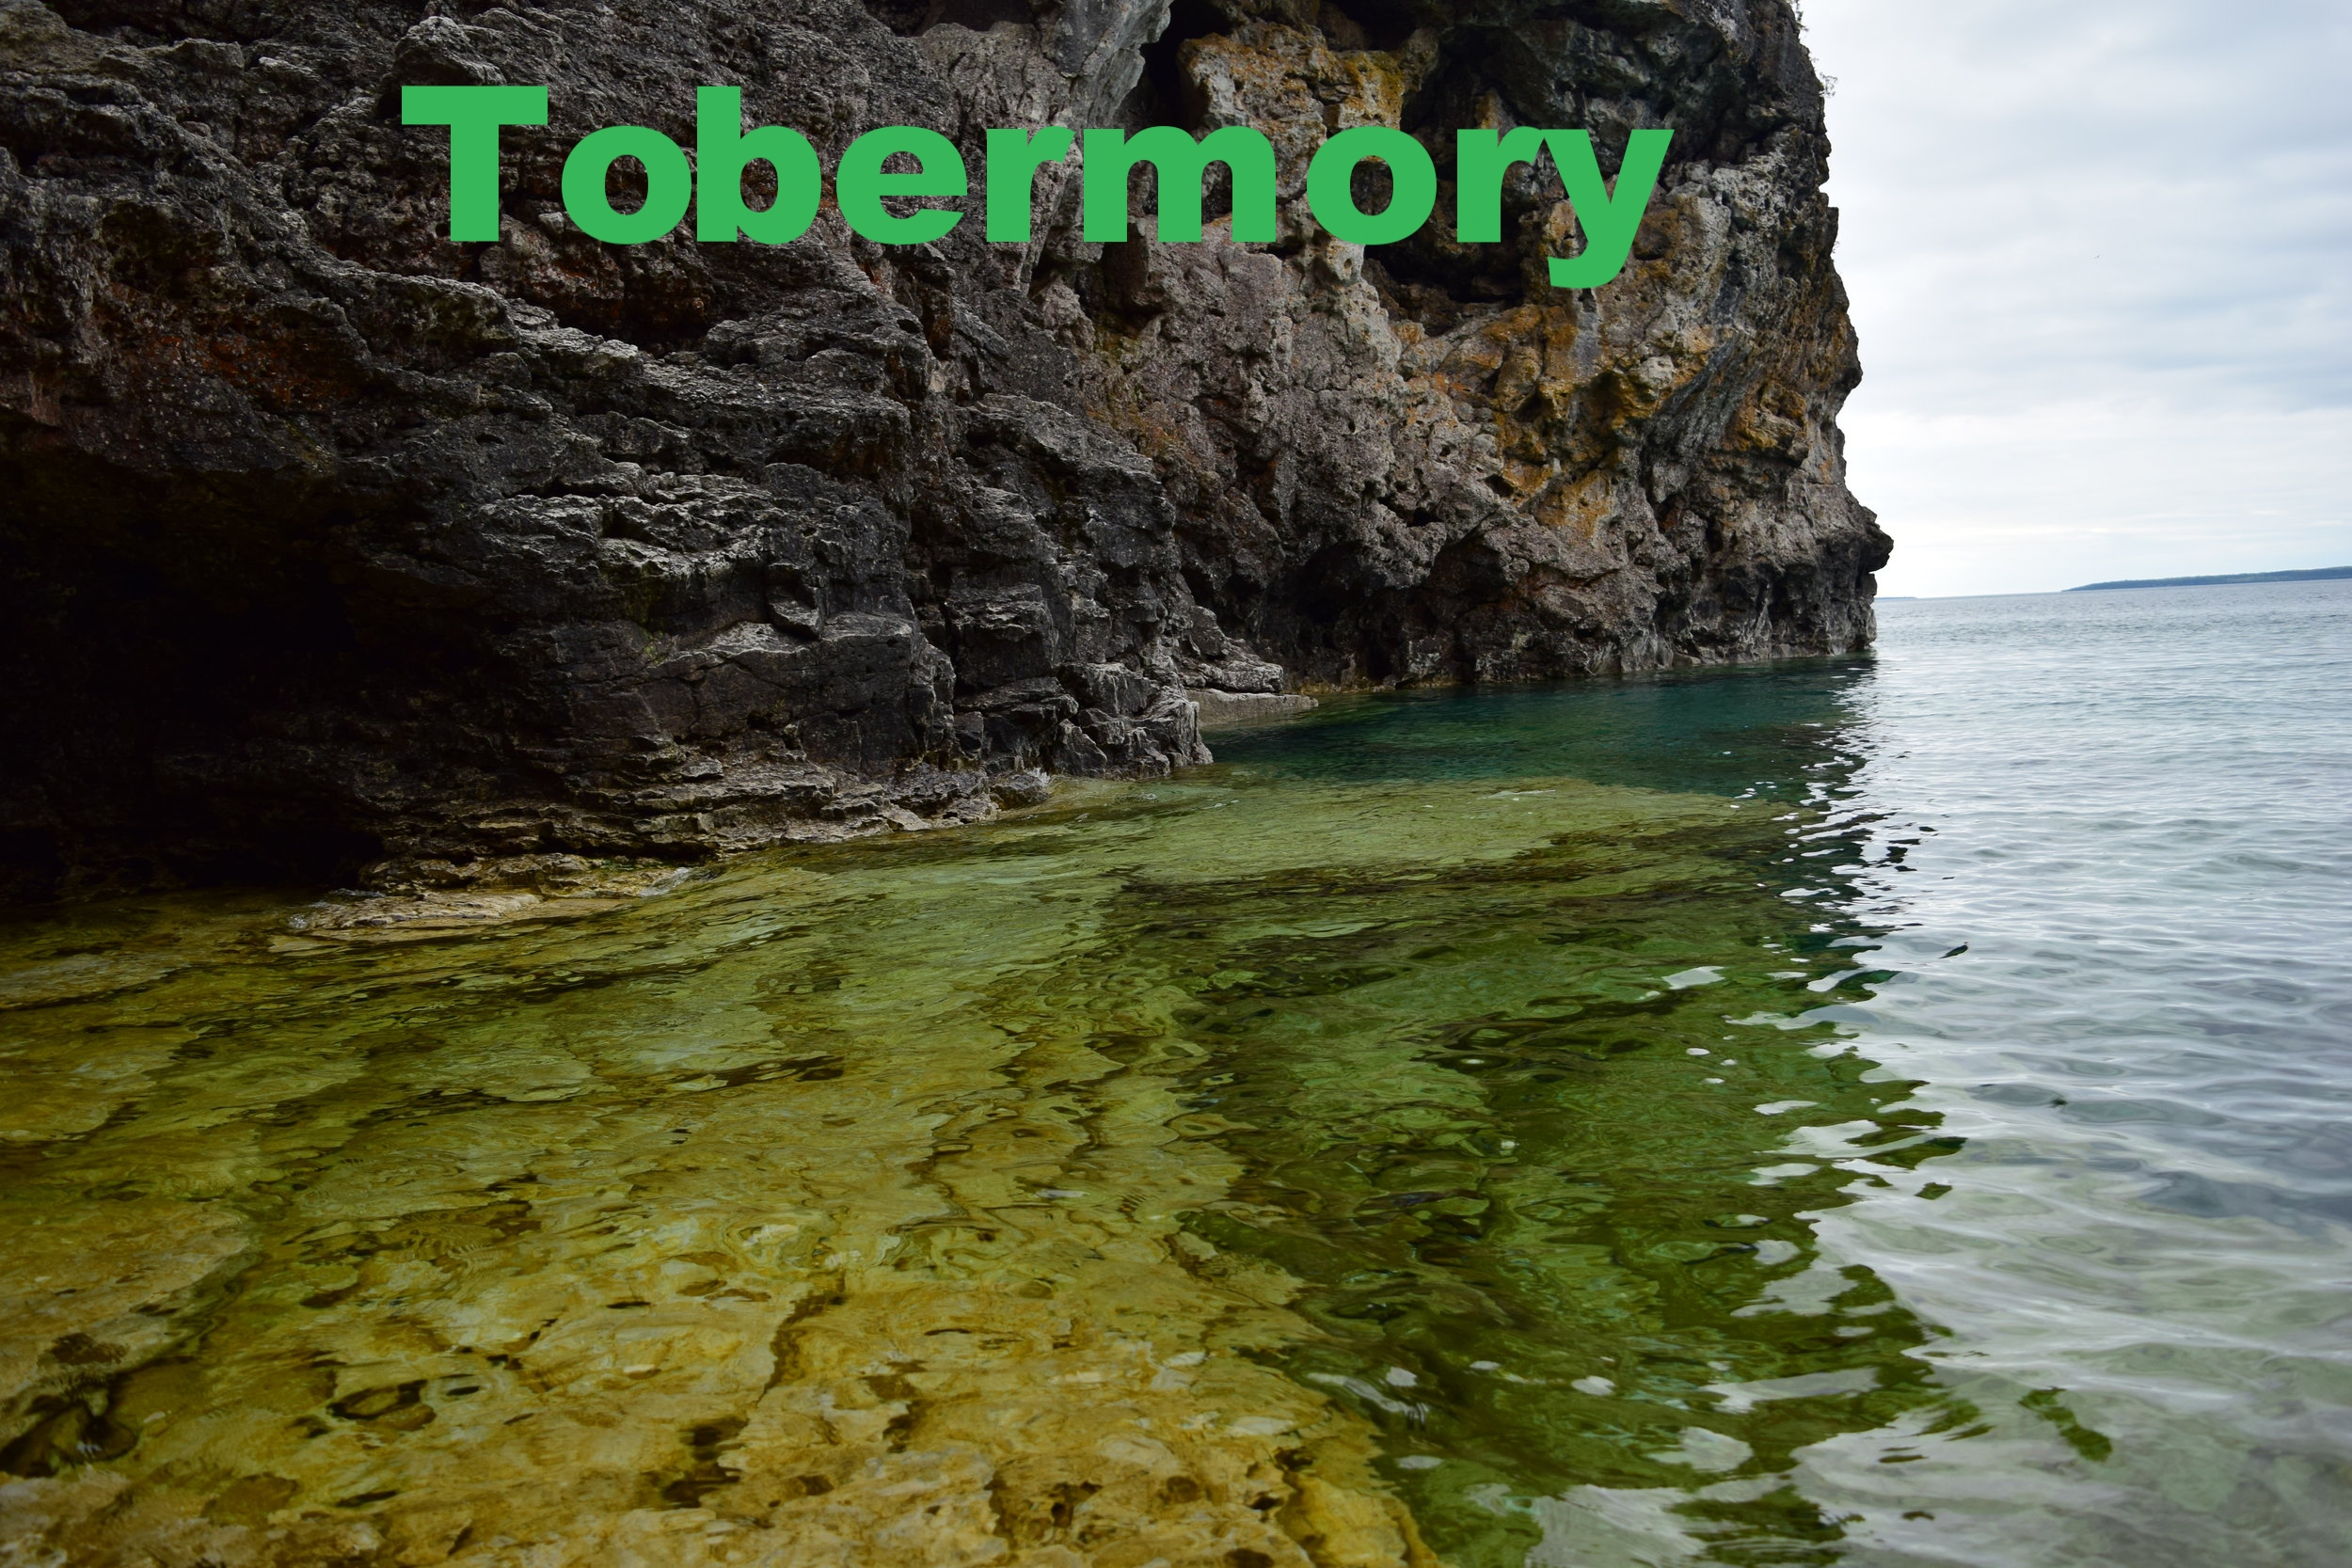 Day Trip to Tobermory